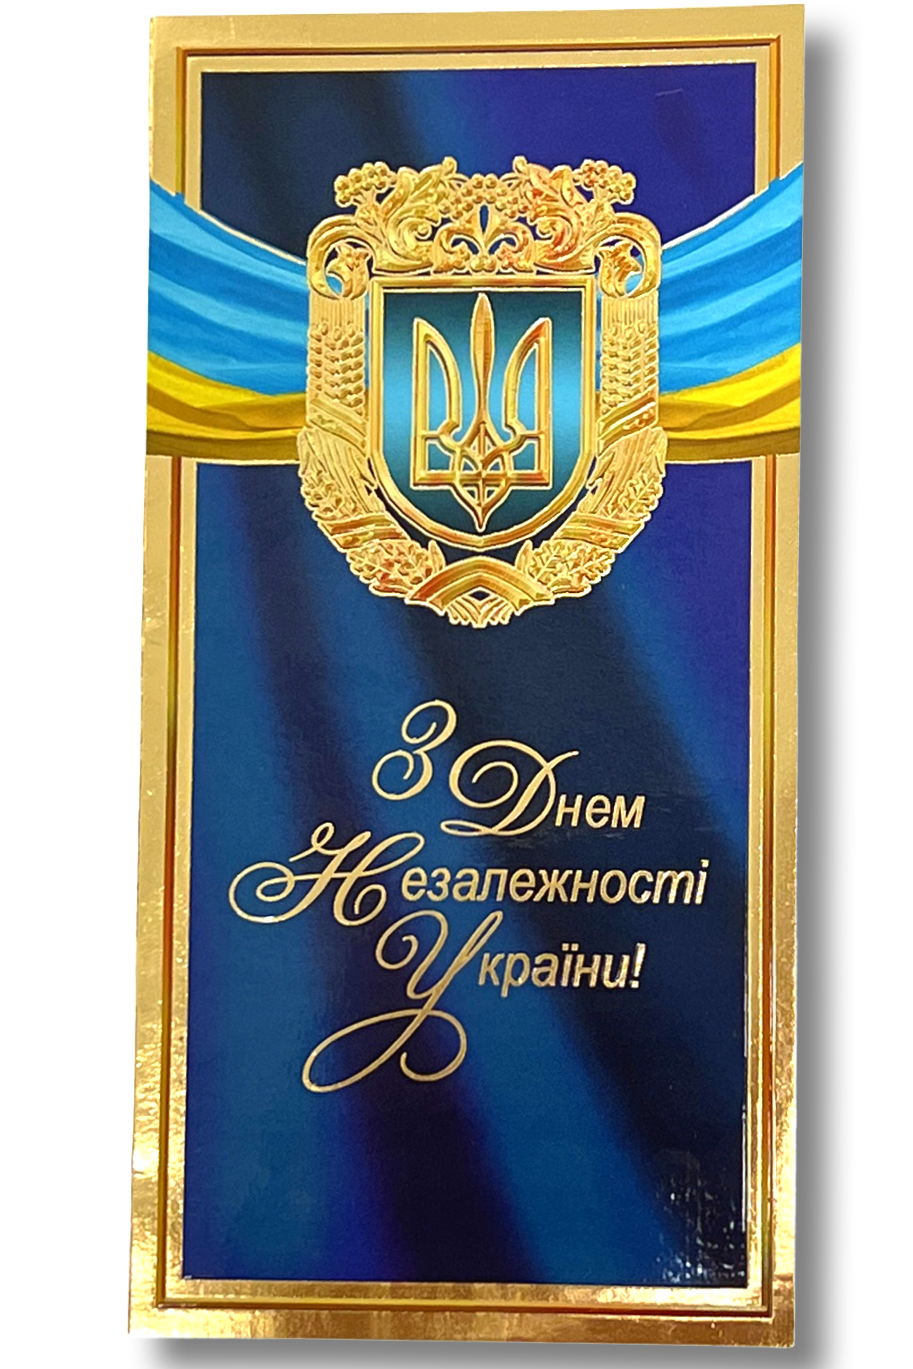 Greeting card "З Днем Незалежності" Independence Day